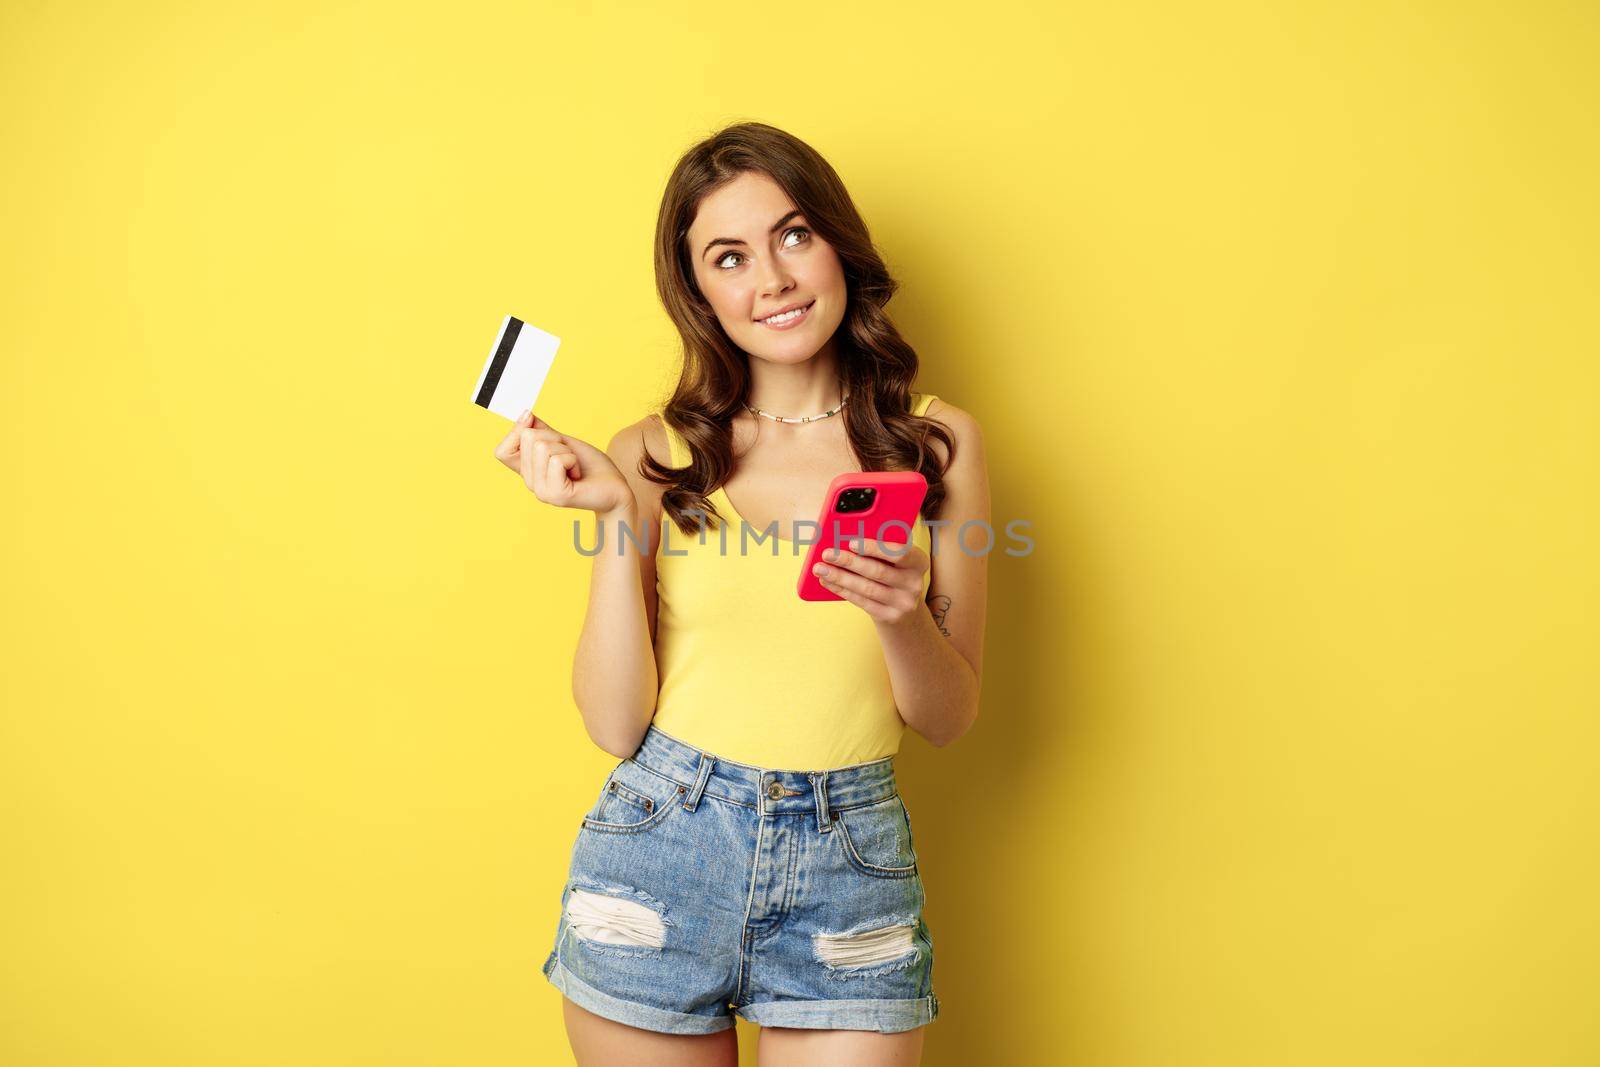 Online shopping. Stylish brunette woman holding smartphone and credit card, paying in app, using mobile phone application, buying smth, standing over yellow background.